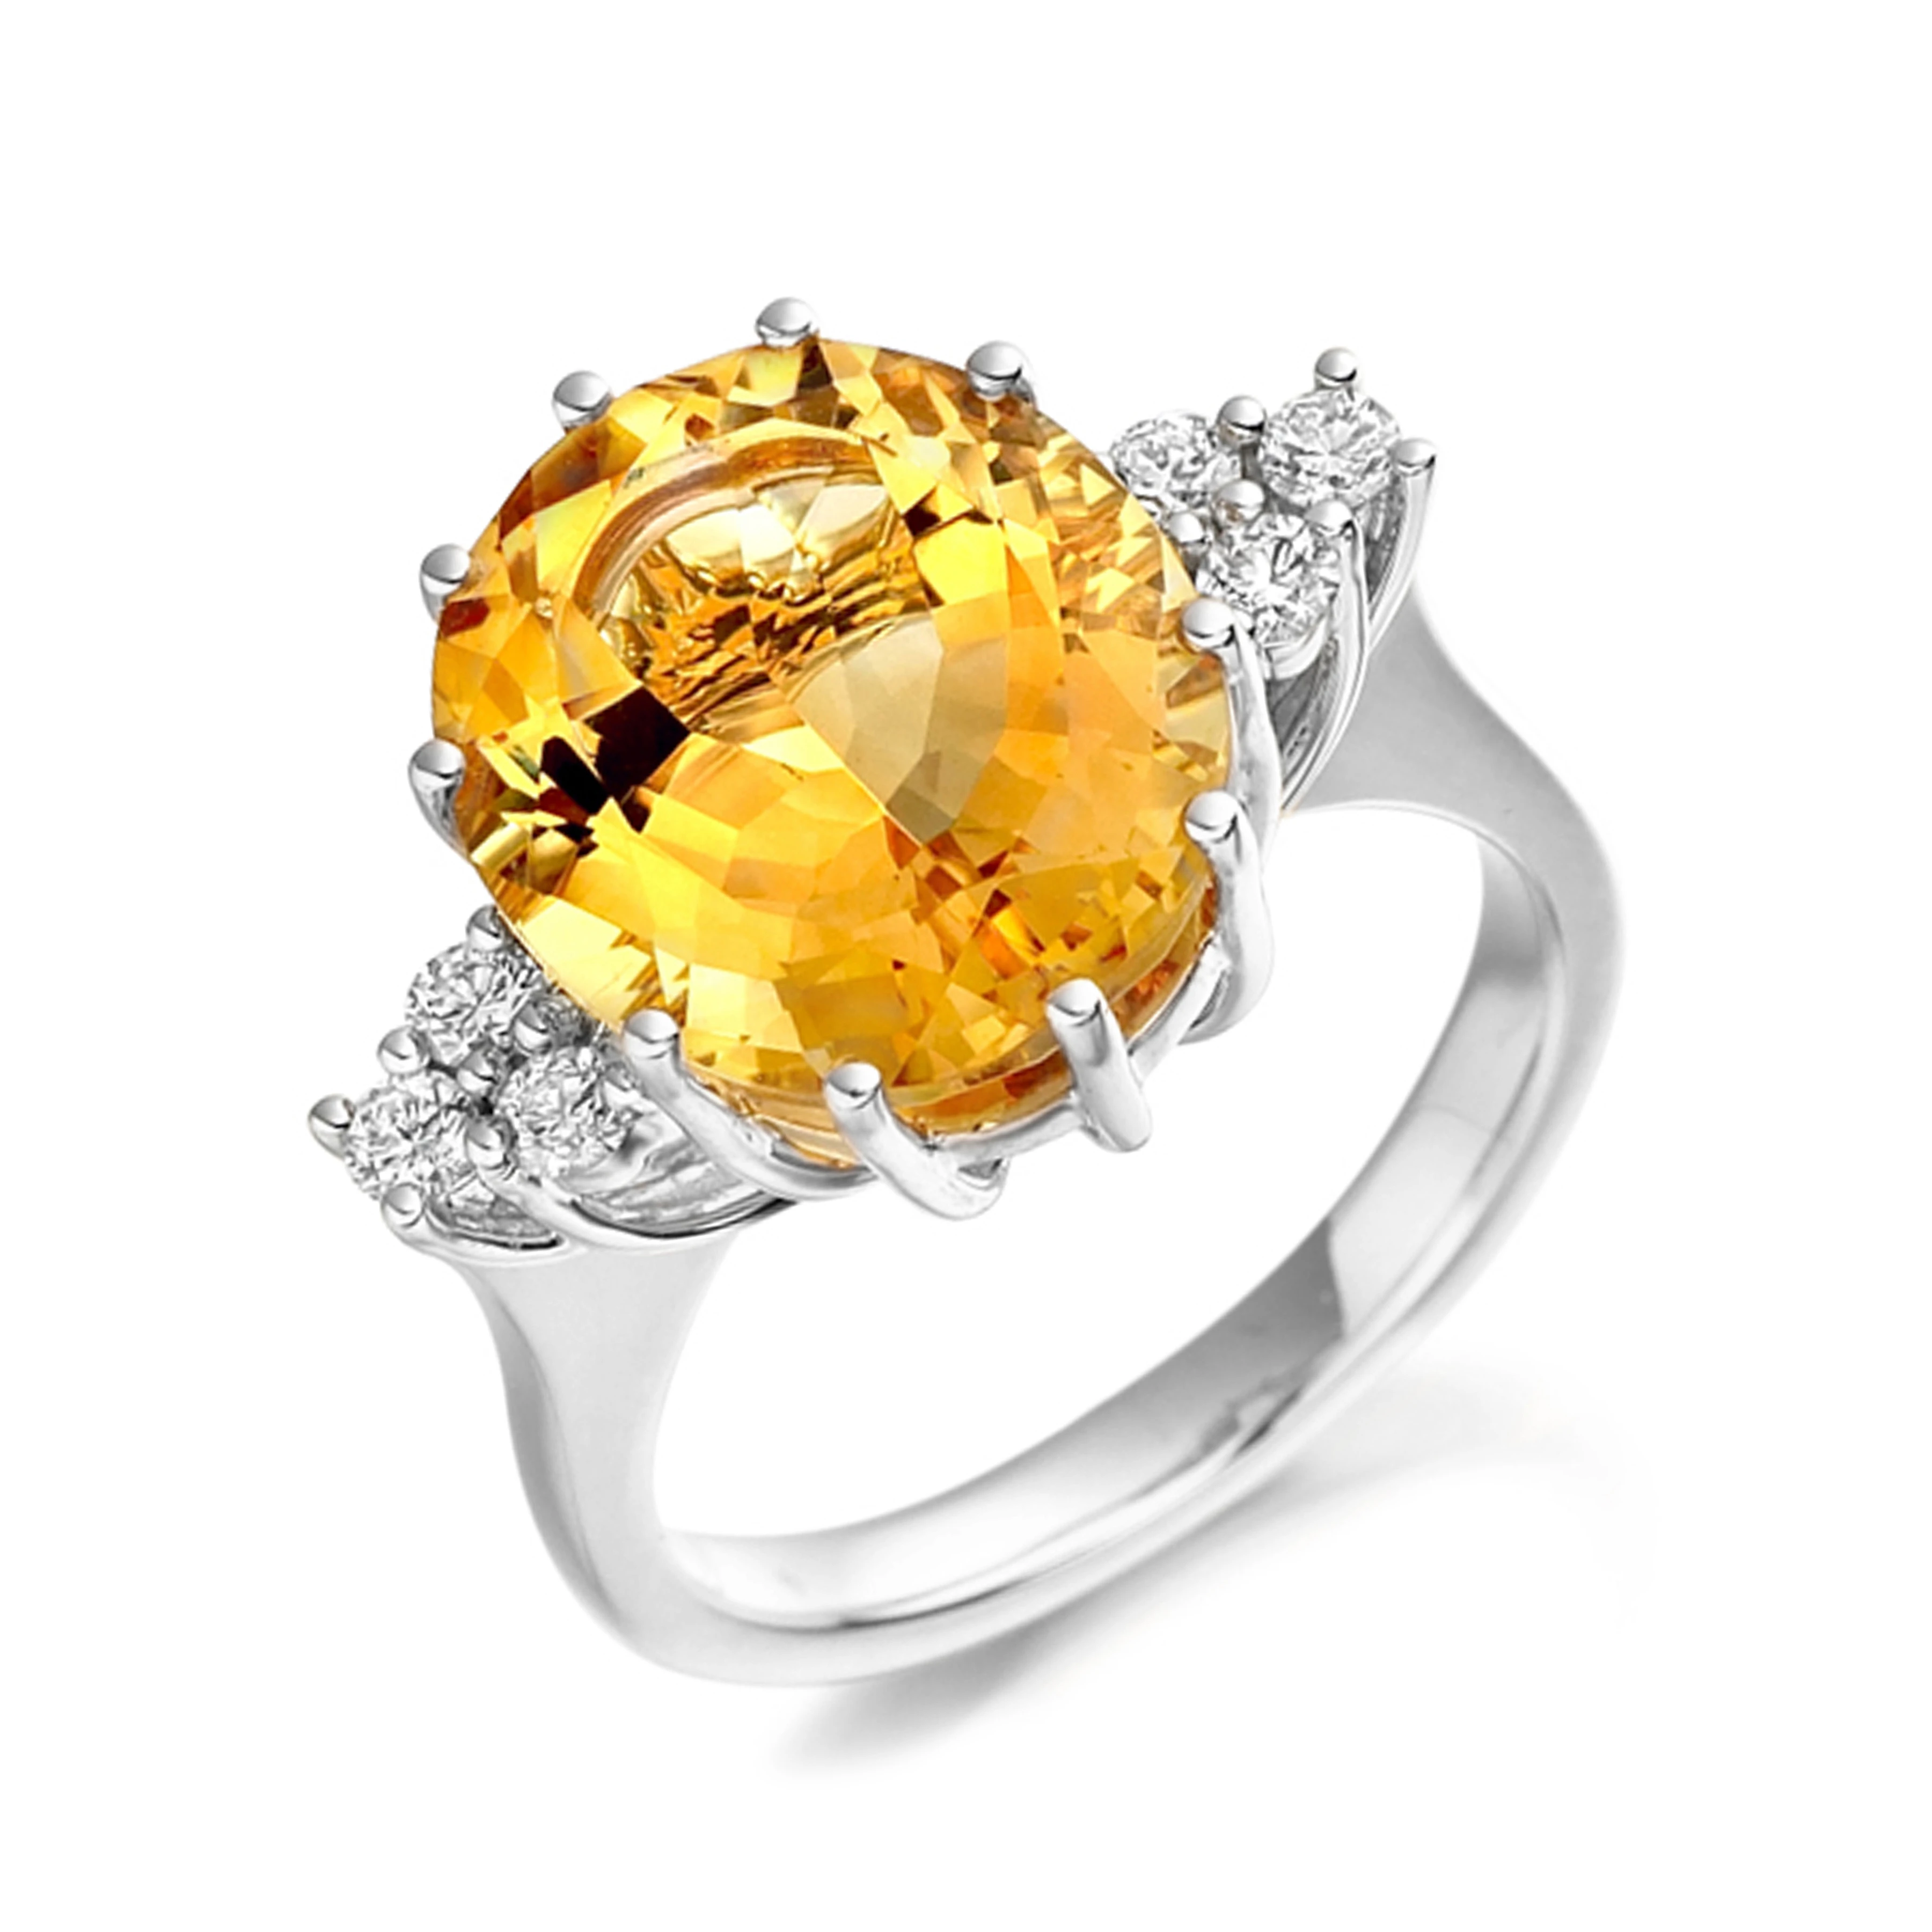 10X9mm Oval Citrine Side Stone Diamond And Gemstone Engagement Ring